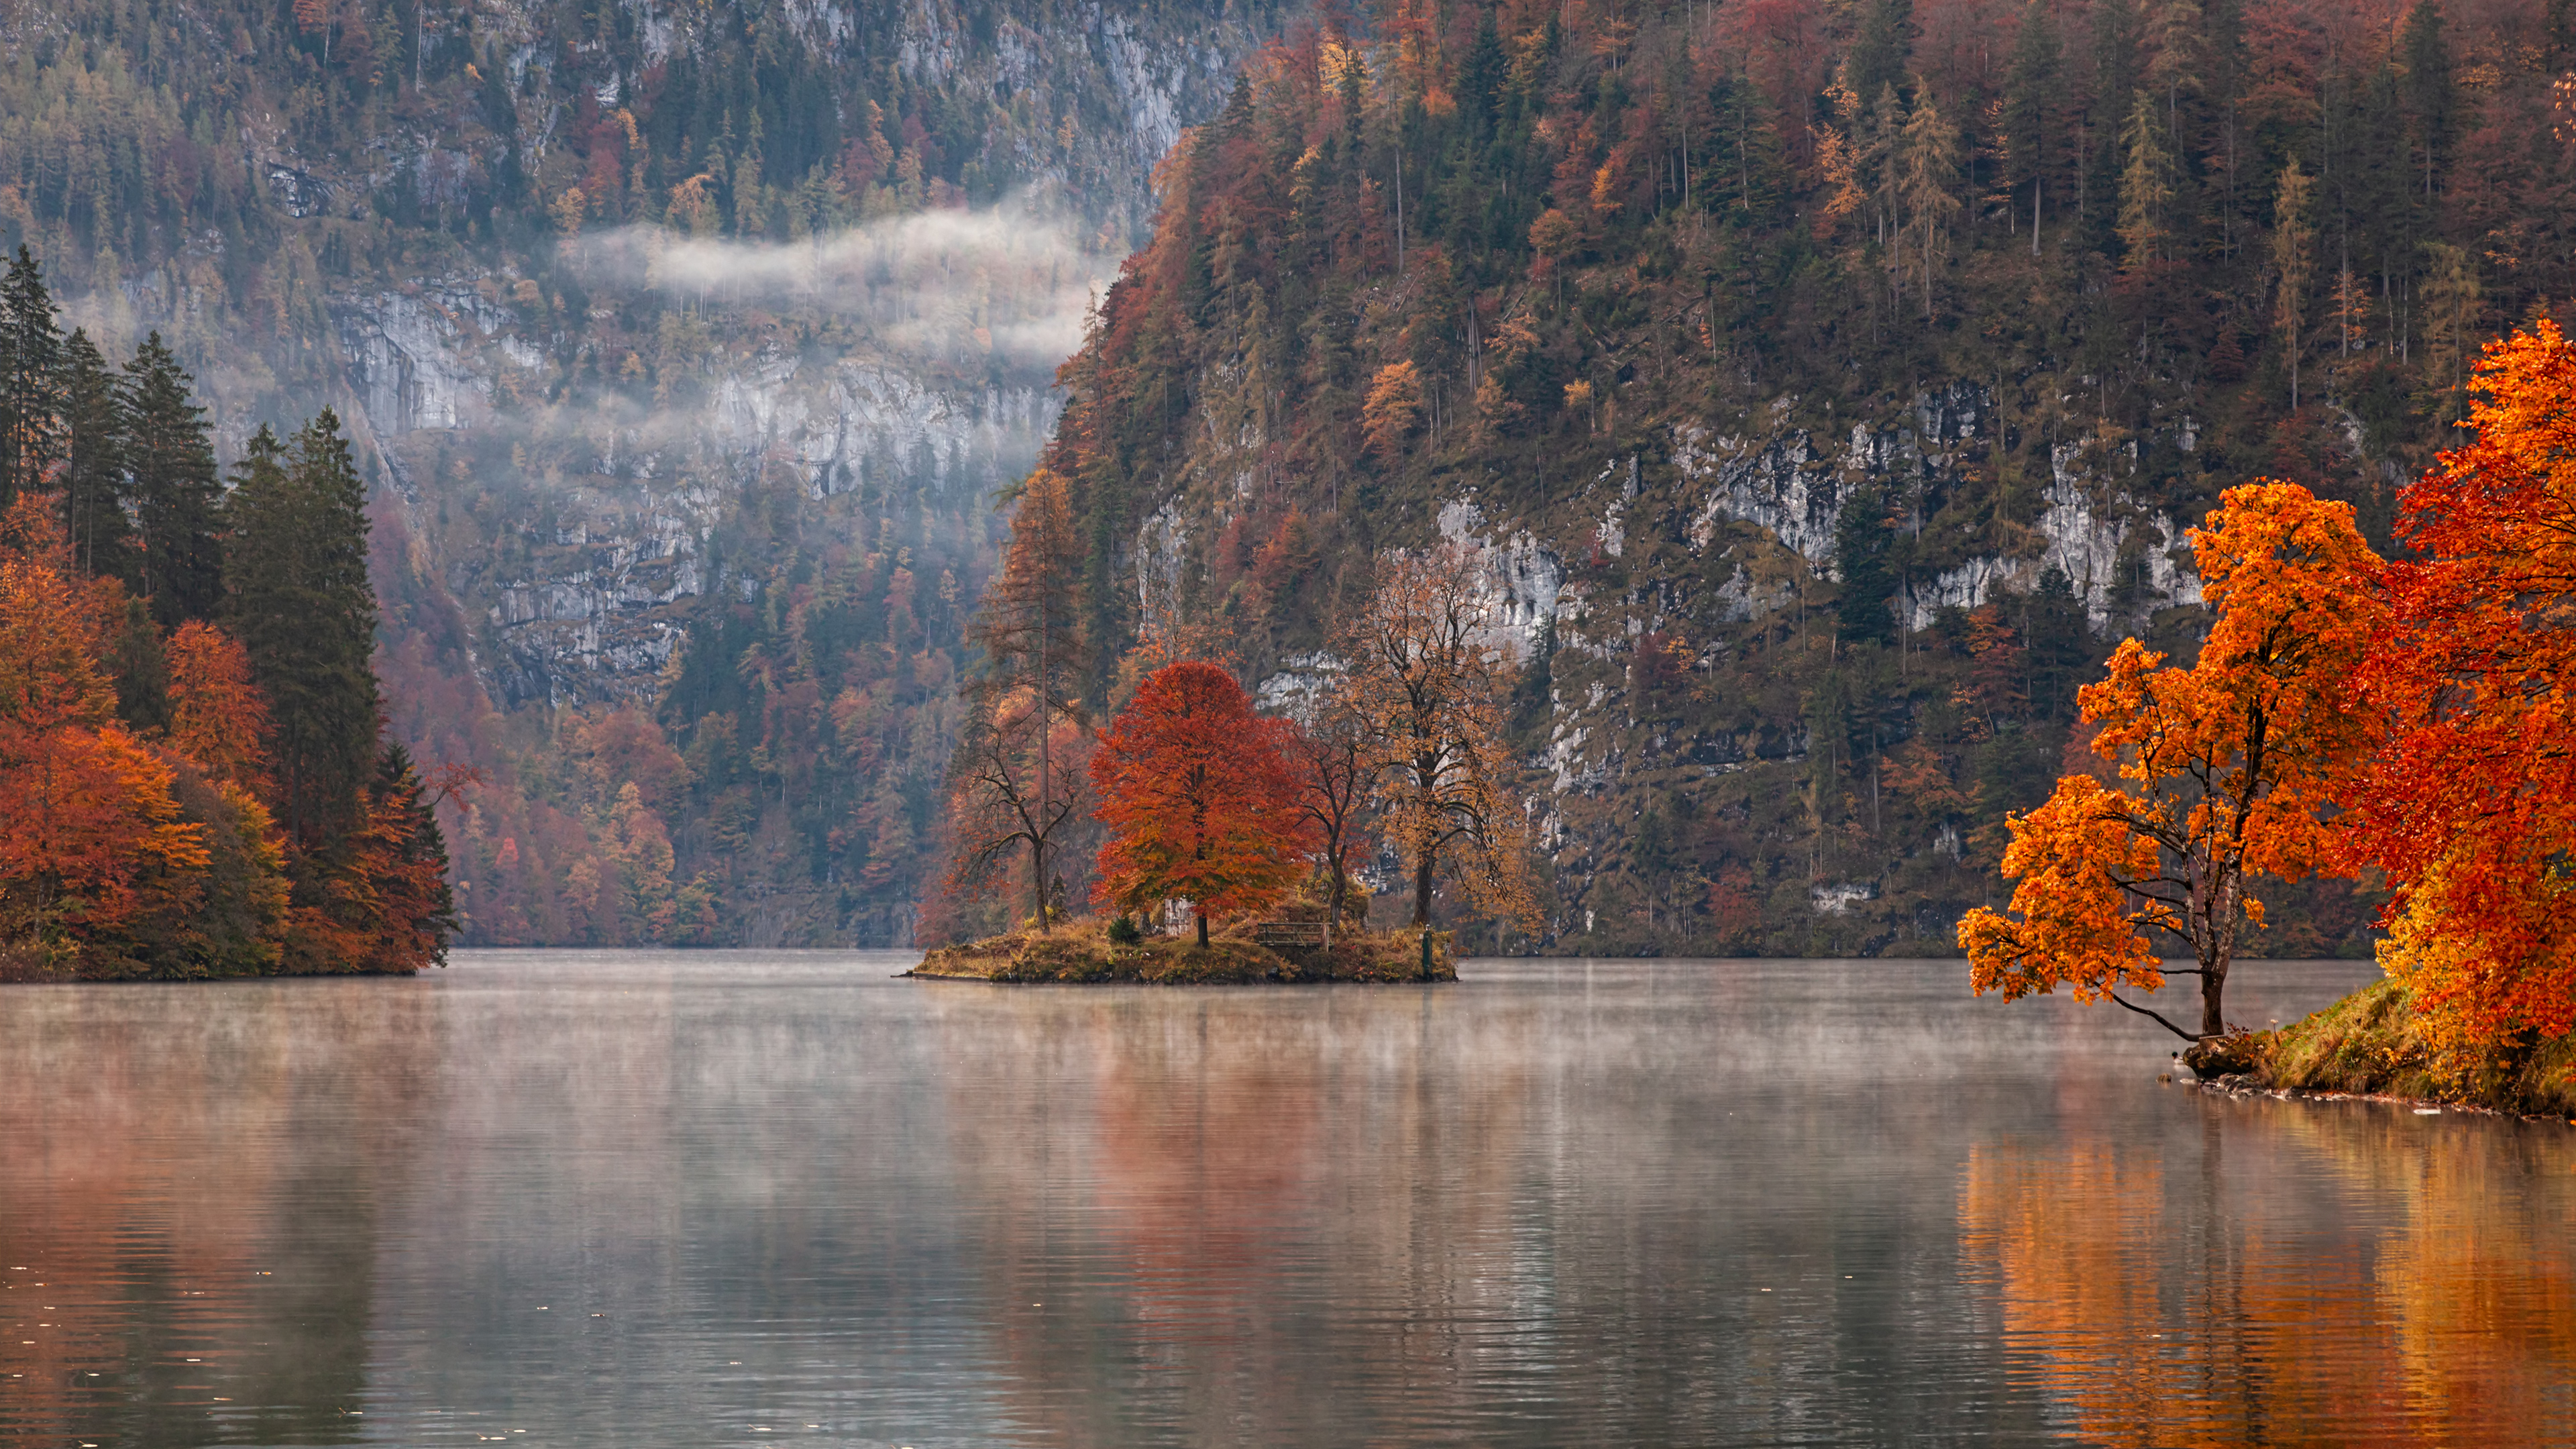 Autumn scenery HD desktop wallpaper featuring a serene lake with vibrant orange trees and a misty mountain backdrop.